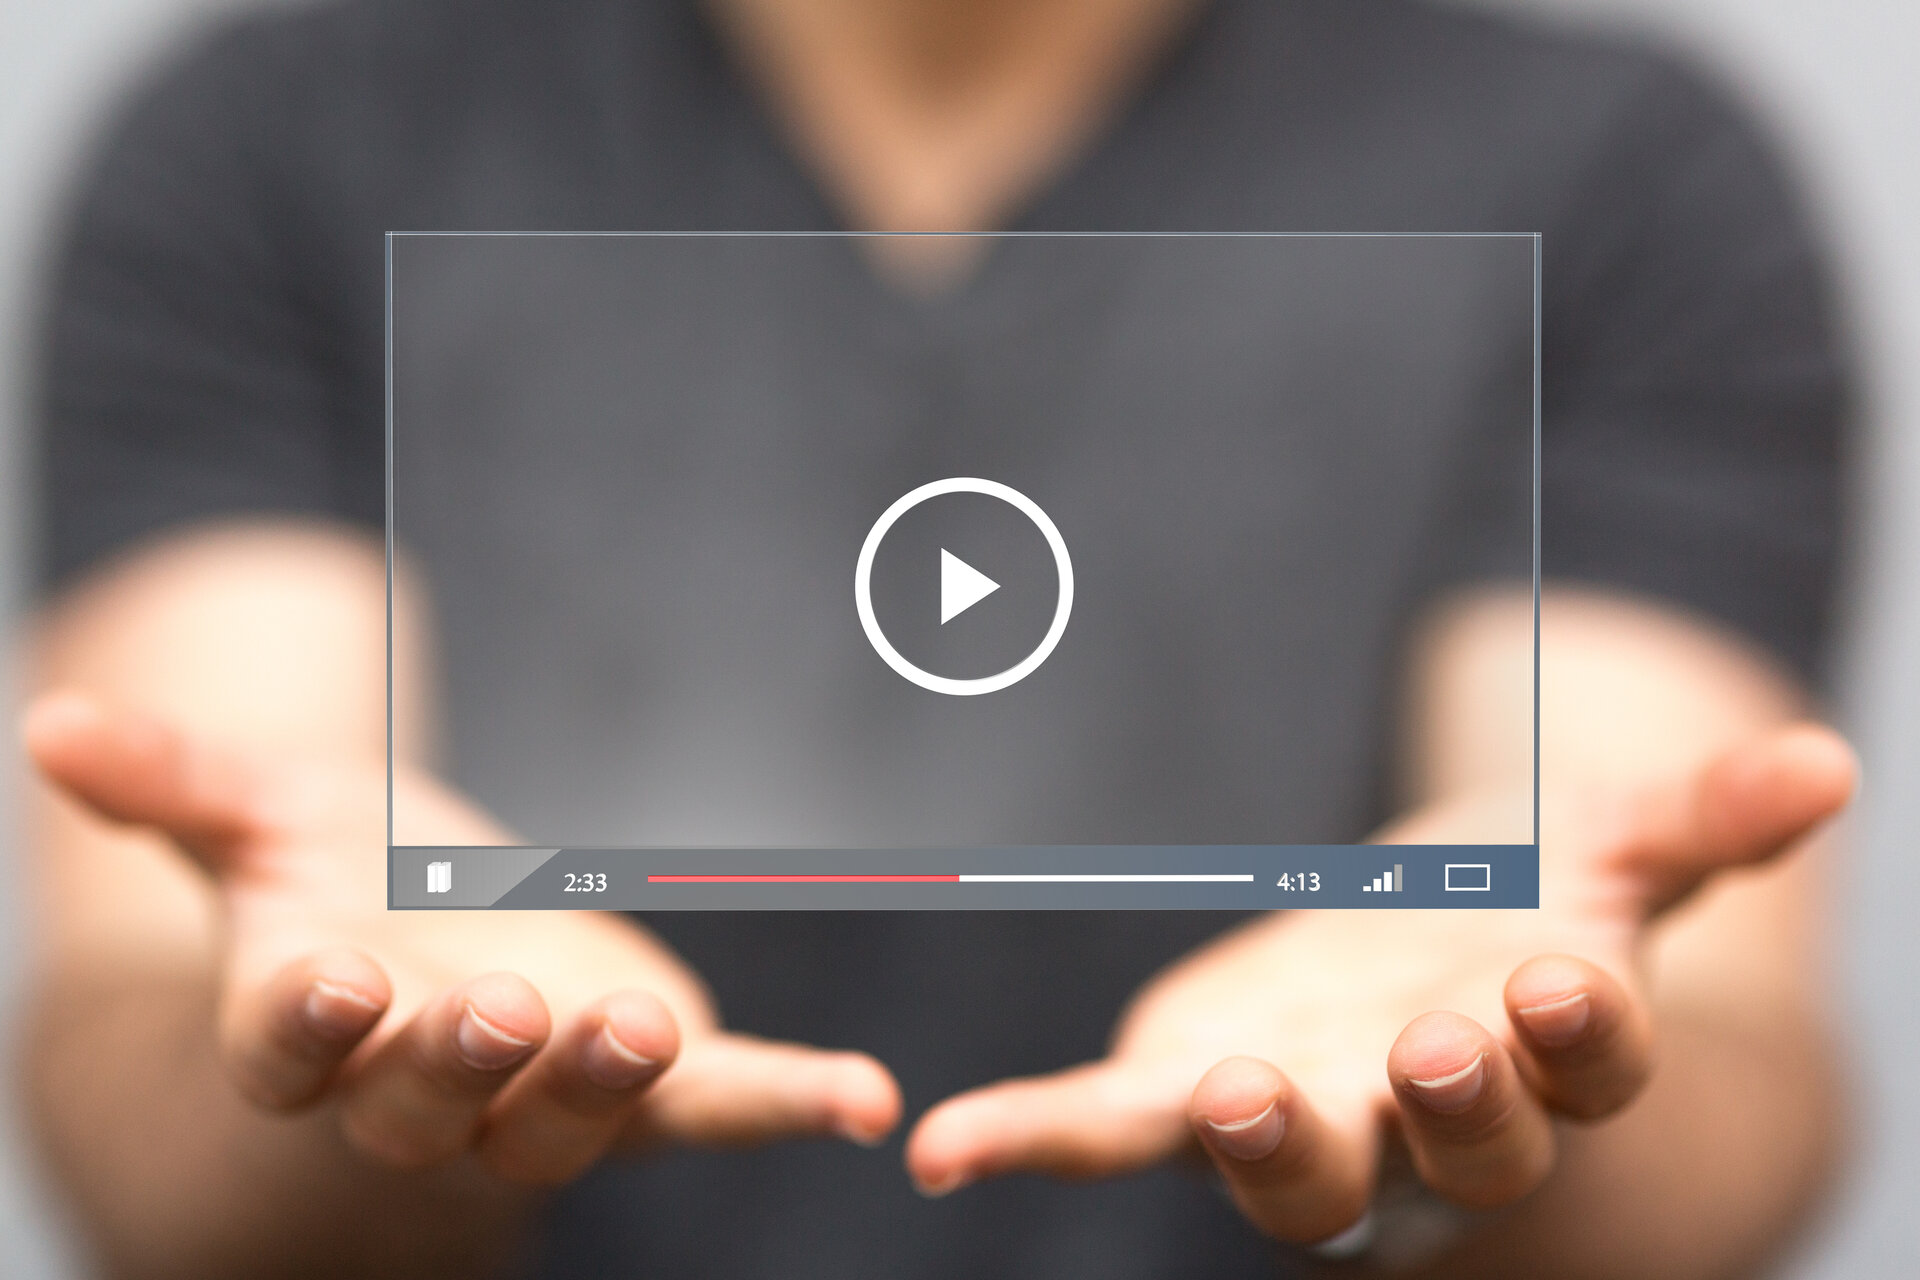 You are currently viewing Business-Tipps: Audiovisuelle Kommunikation lohnt sich